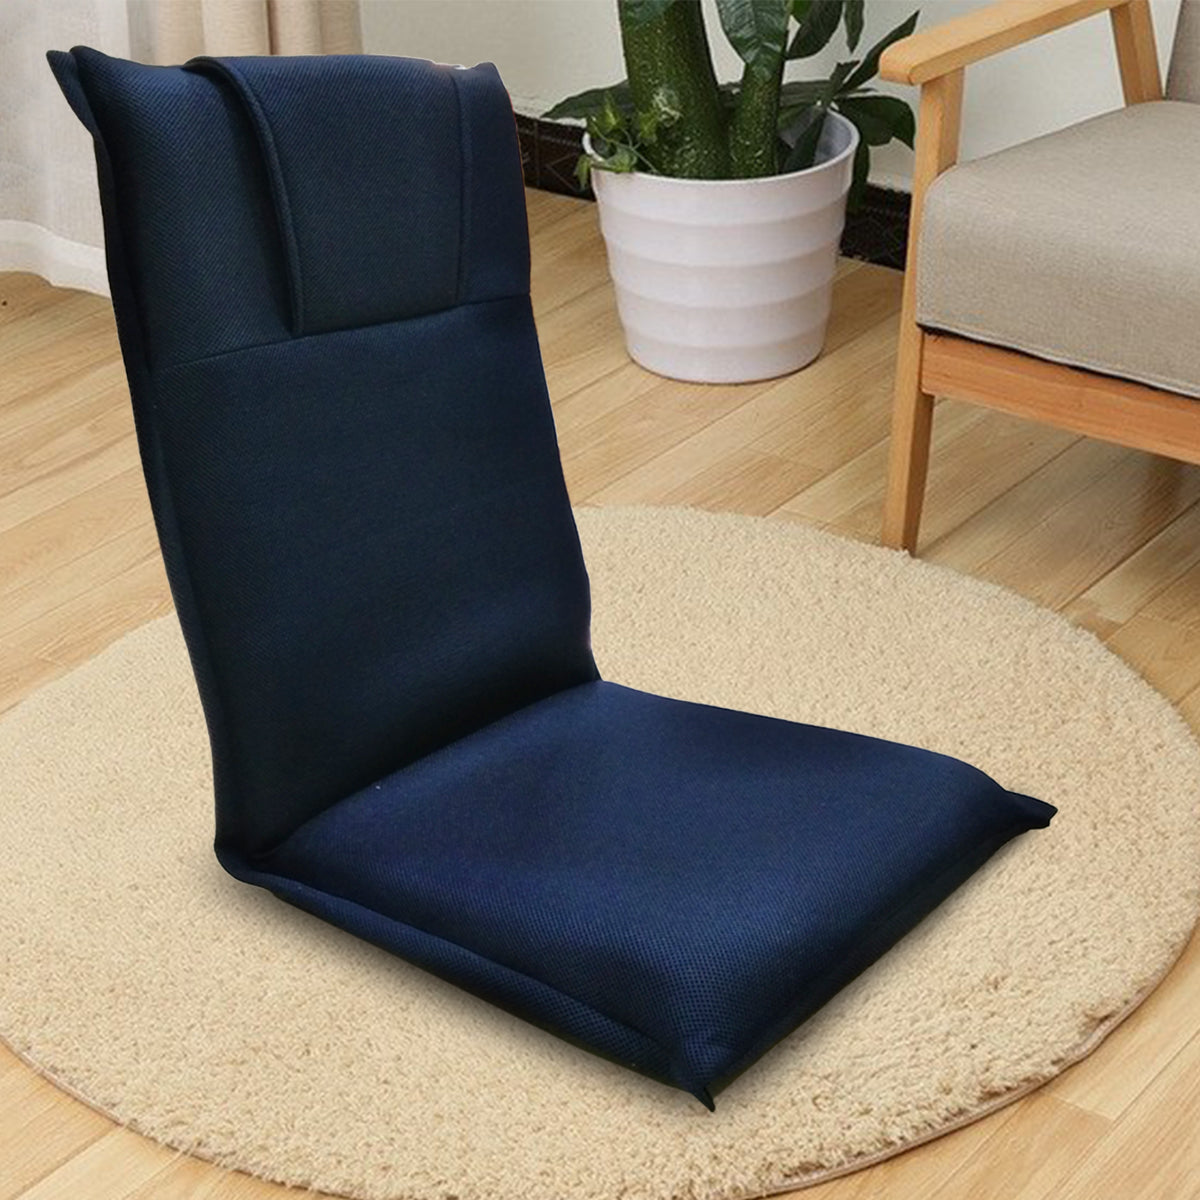 Kawachi Relaxing Meditation and Yoga Chair with Back Support Seat